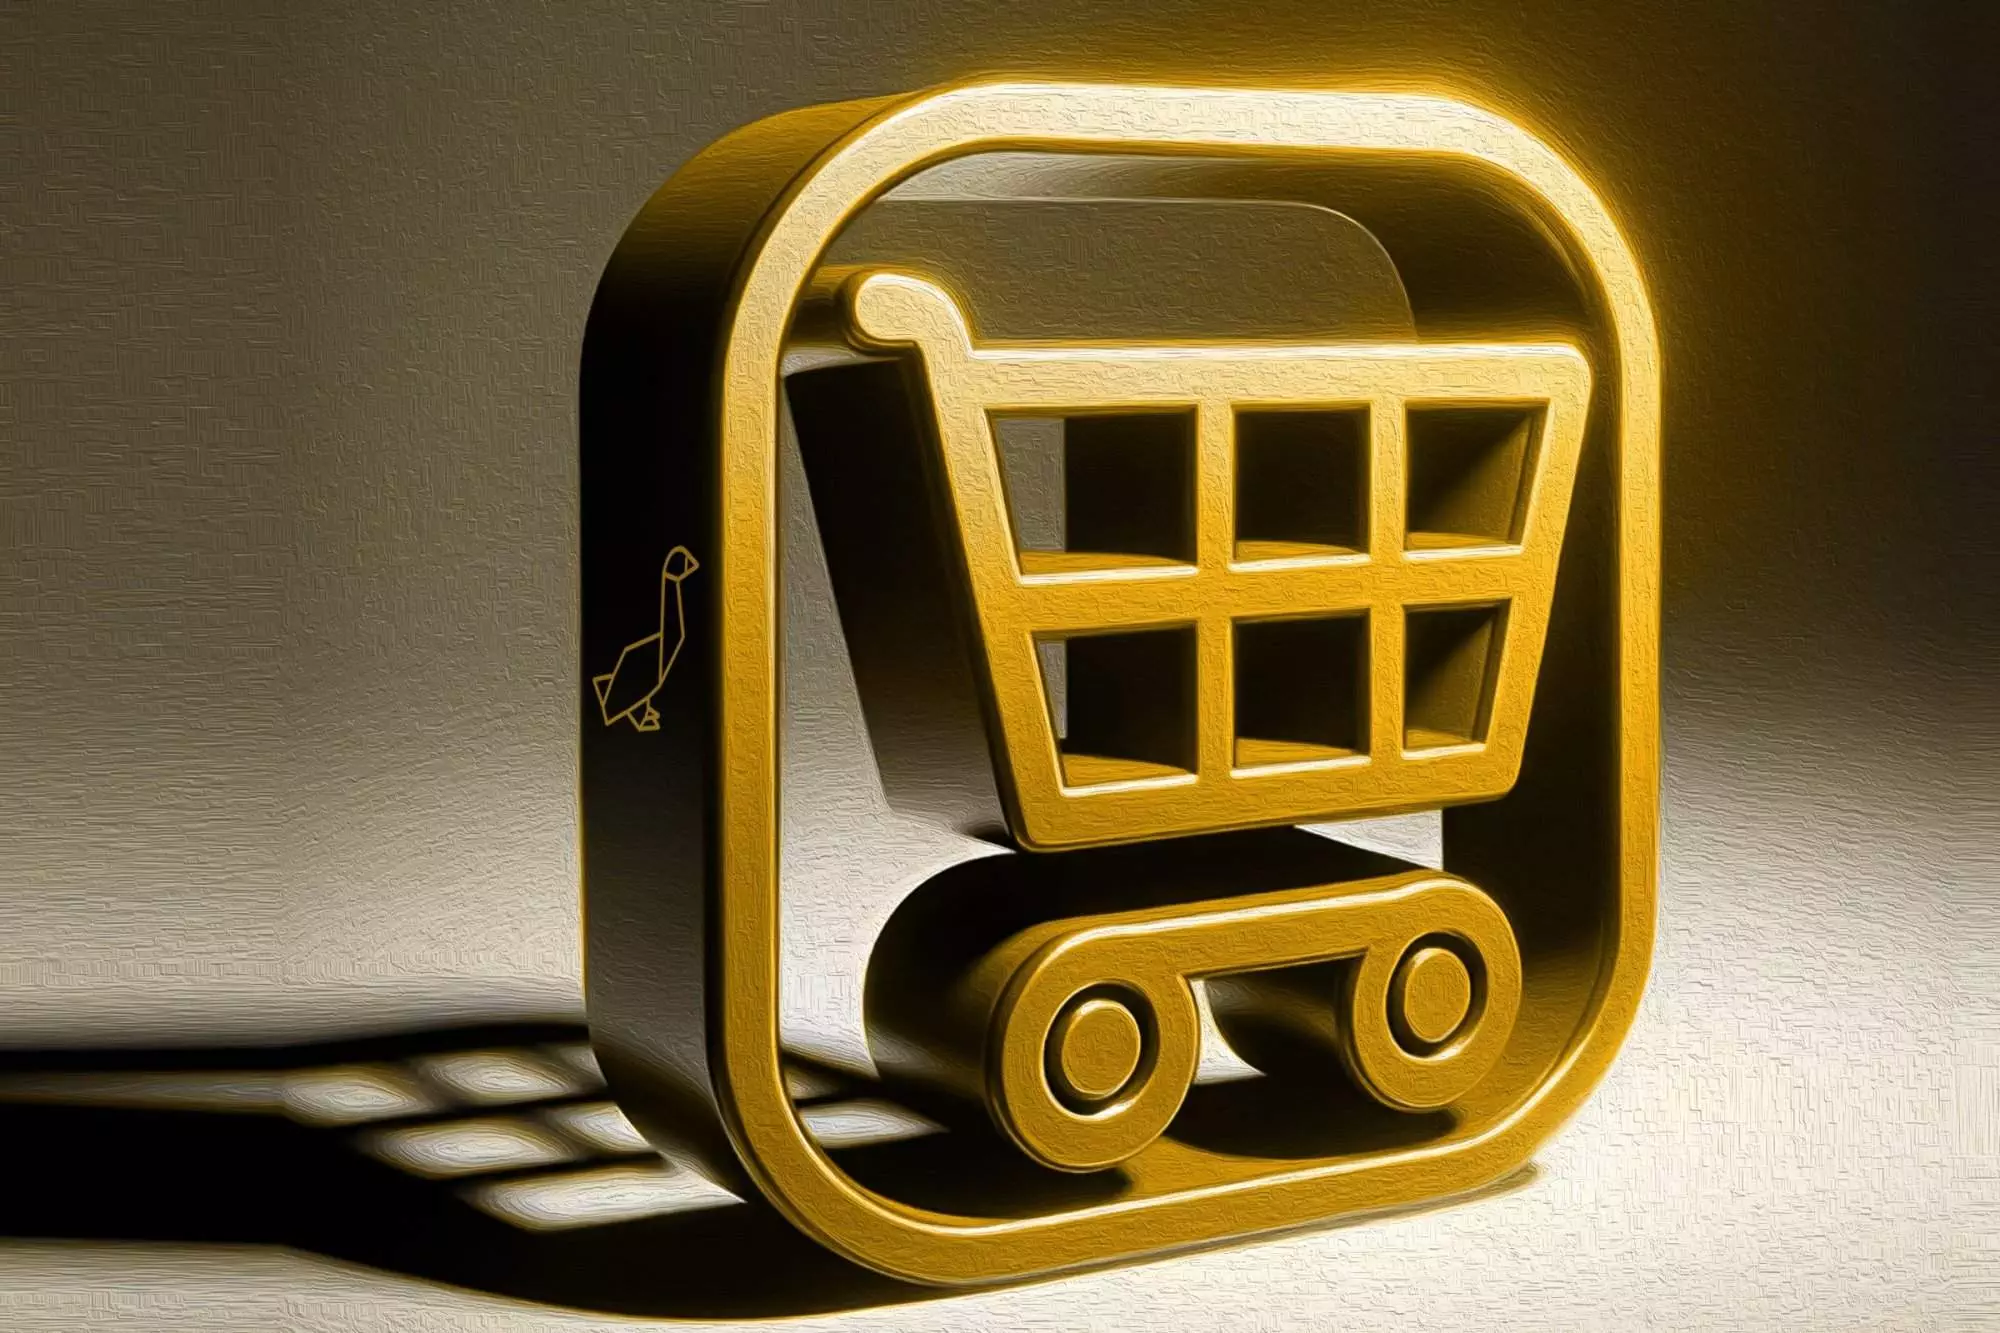 Golden shopping cart icon on a dark background, symbolizing the potential to start an Etsy shop with minimal investment.